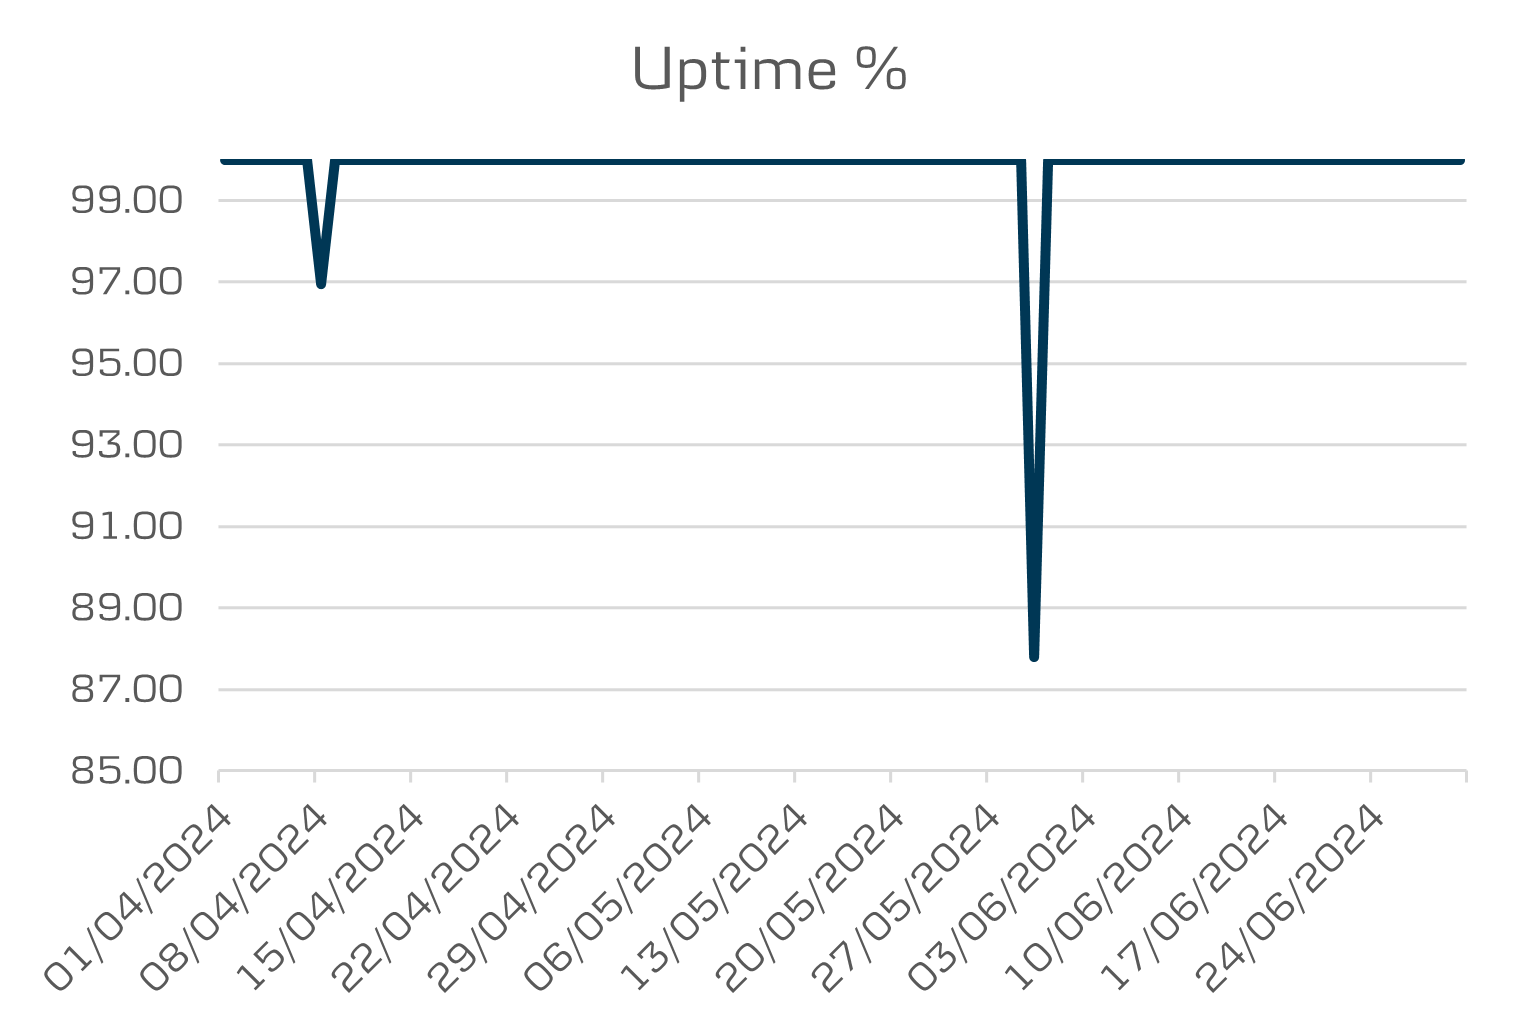 District uptime